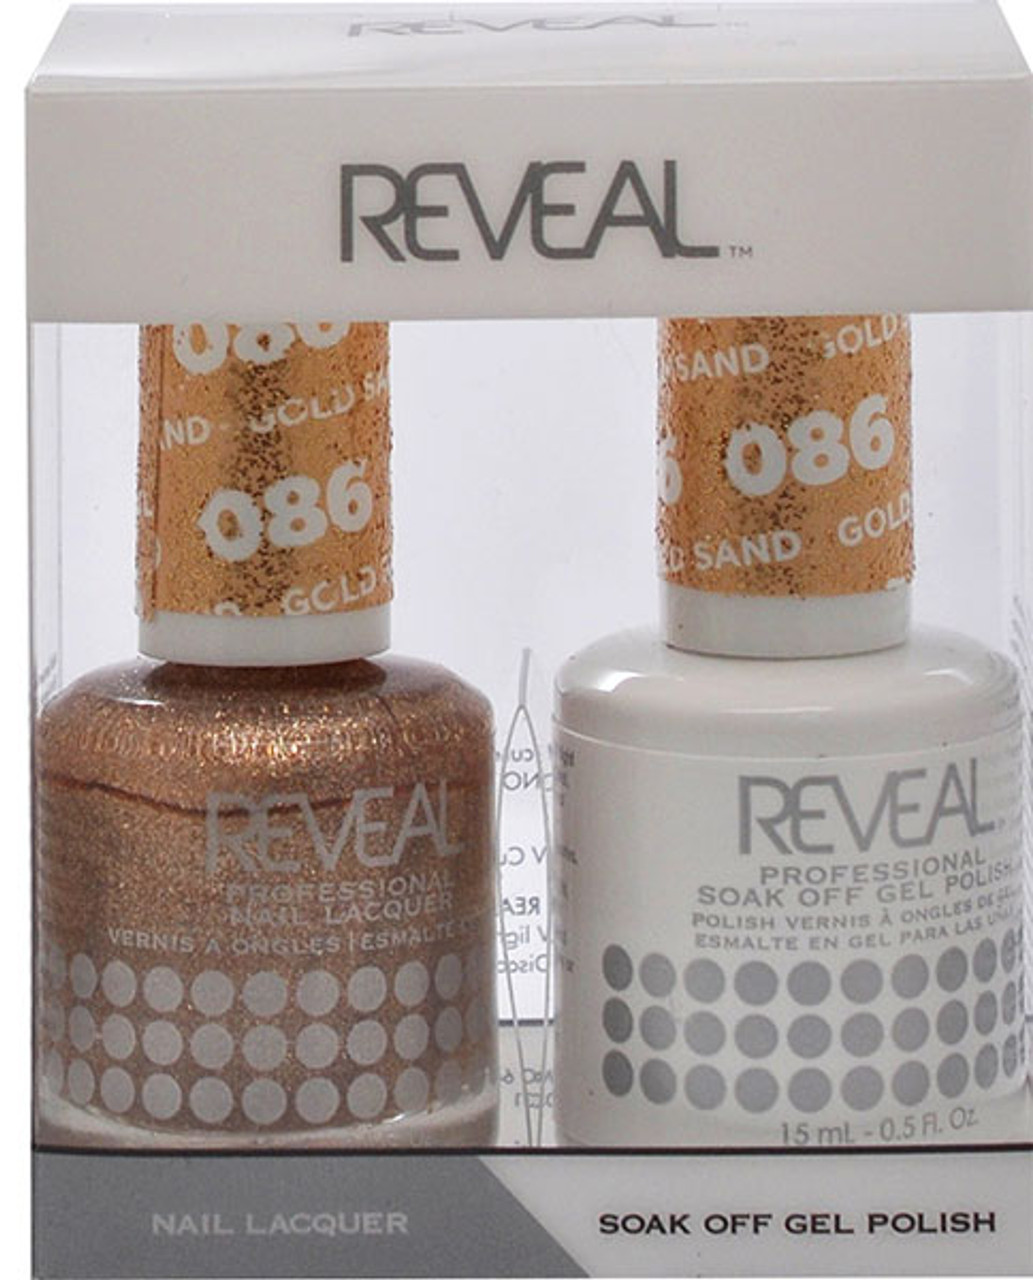 Reveal Gel Polish & Nail Lacquer Matching Duo - GOLD SAND - .5 oz